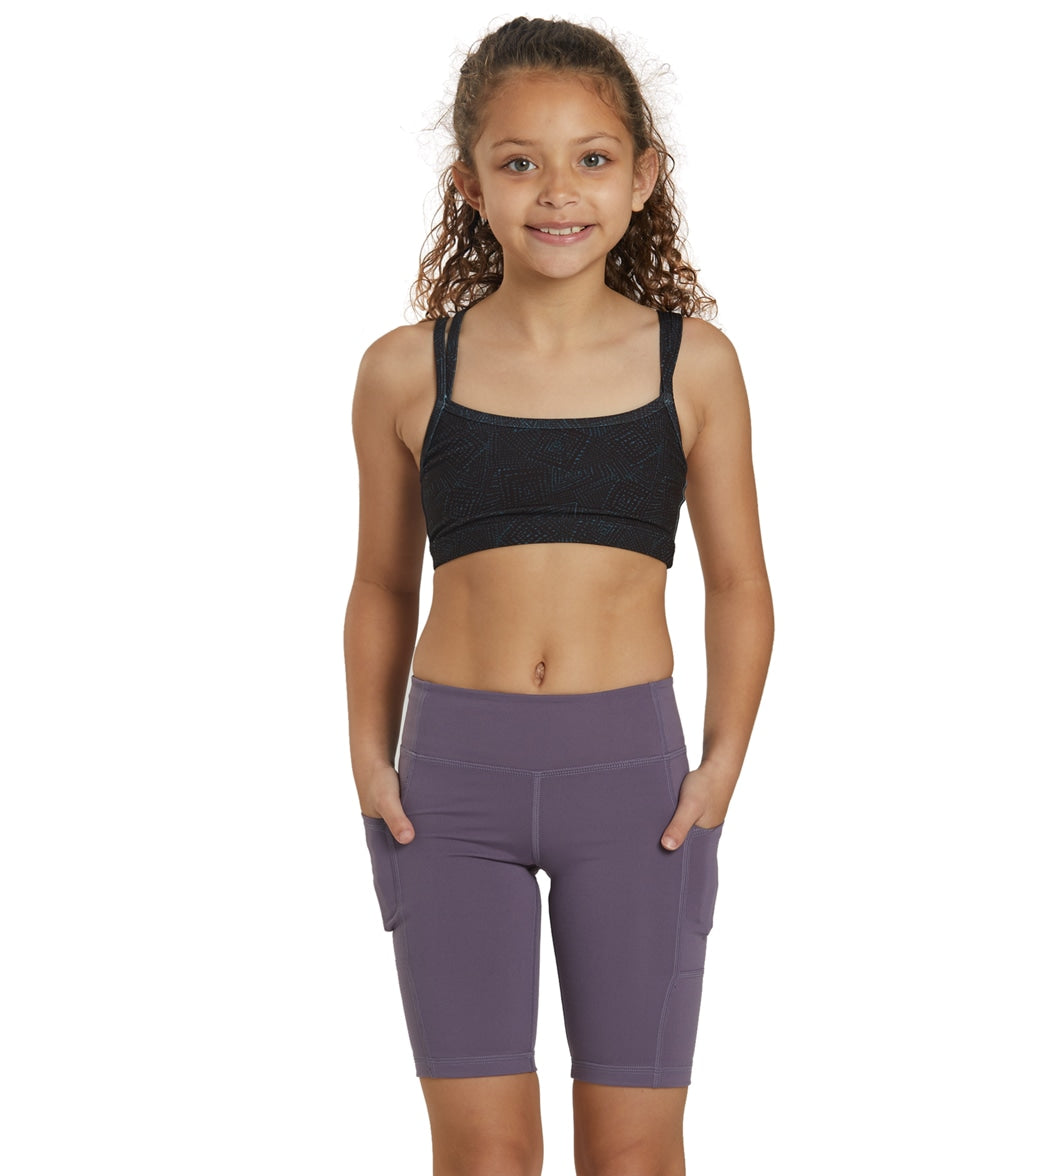 Kids yoga clothes  Yoga for kids, Kids yoga clothes, Kids party